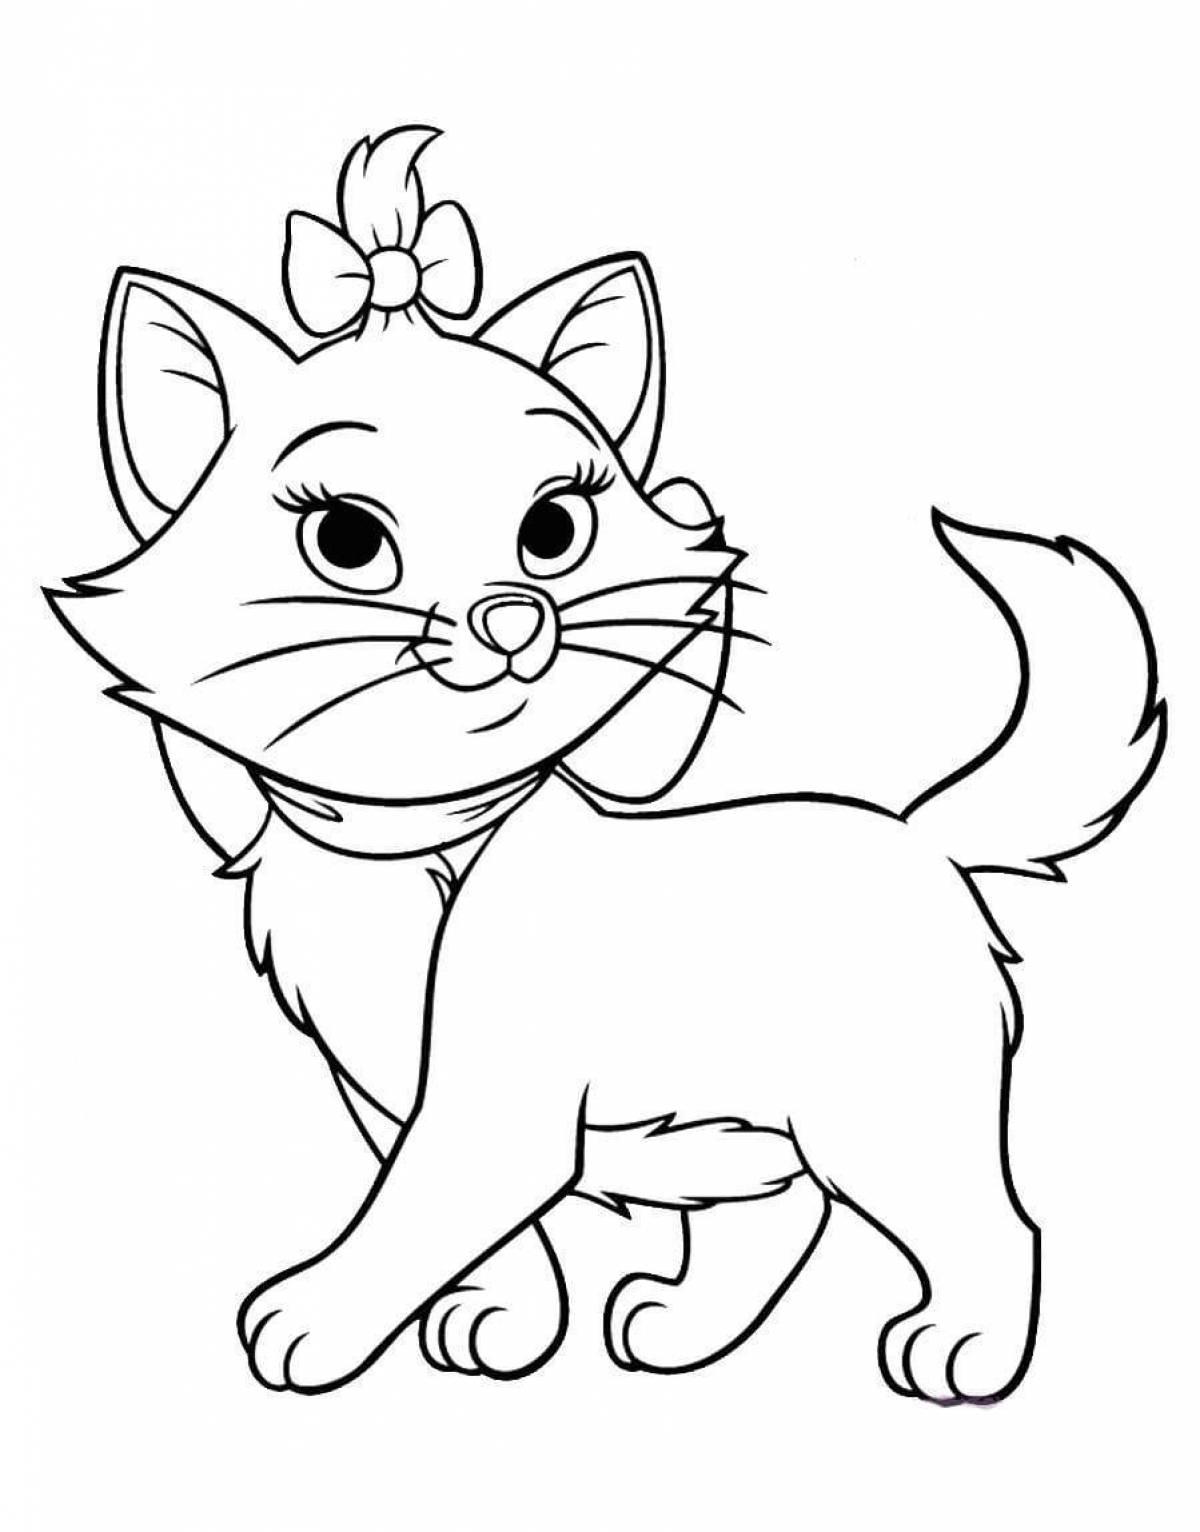 Friendly cat coloring book for kids 6-7 years old